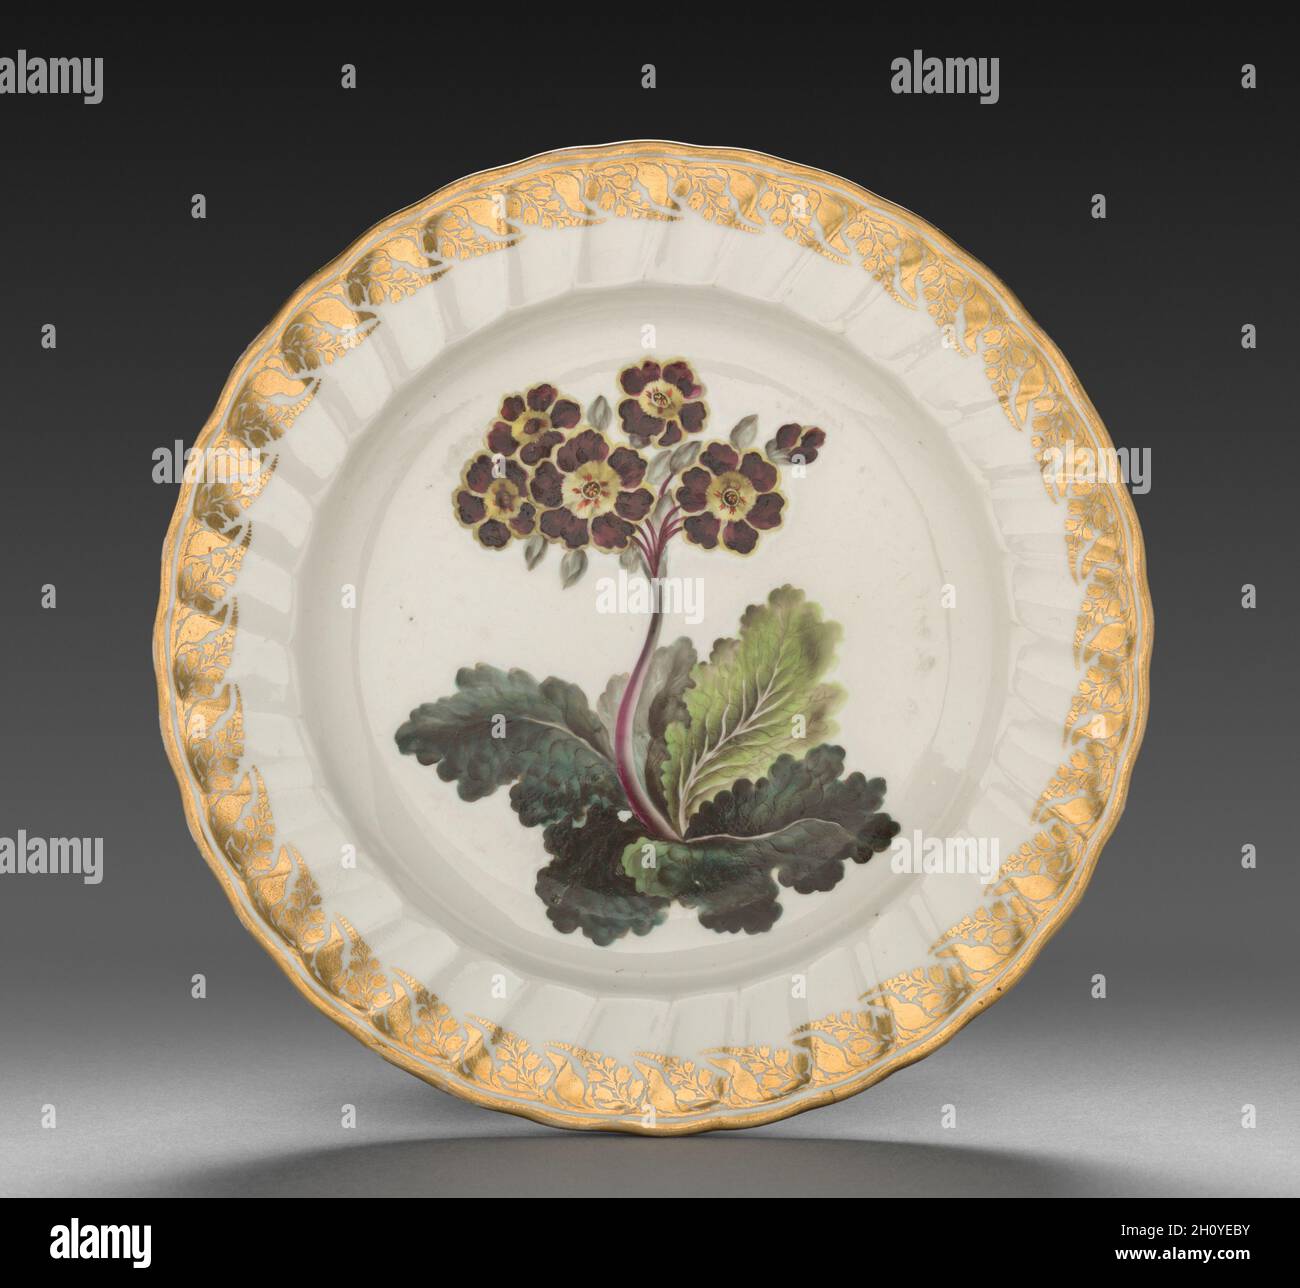 Plate from Dessert Service: Polyanthus, c. 1800. Derby (Crown Derby Period) (British). Porcelain; diameter: 23.6 cm (9 5/16 in.); overall: 3.4 cm (1 5/16 in.).  Each dish is decorated with recognizable plants, the names of which are inscribed on the base in both Latin and English. Identifying the blossoms only became customary in the late 18th century when a single piece of porcelain was decorated with one species, and flowers were represented along with leaves, stems, seed pods, and roots. All of this reflects Carolus Linnaeus’s recent invention of a scientific method to categorize all known Stock Photo